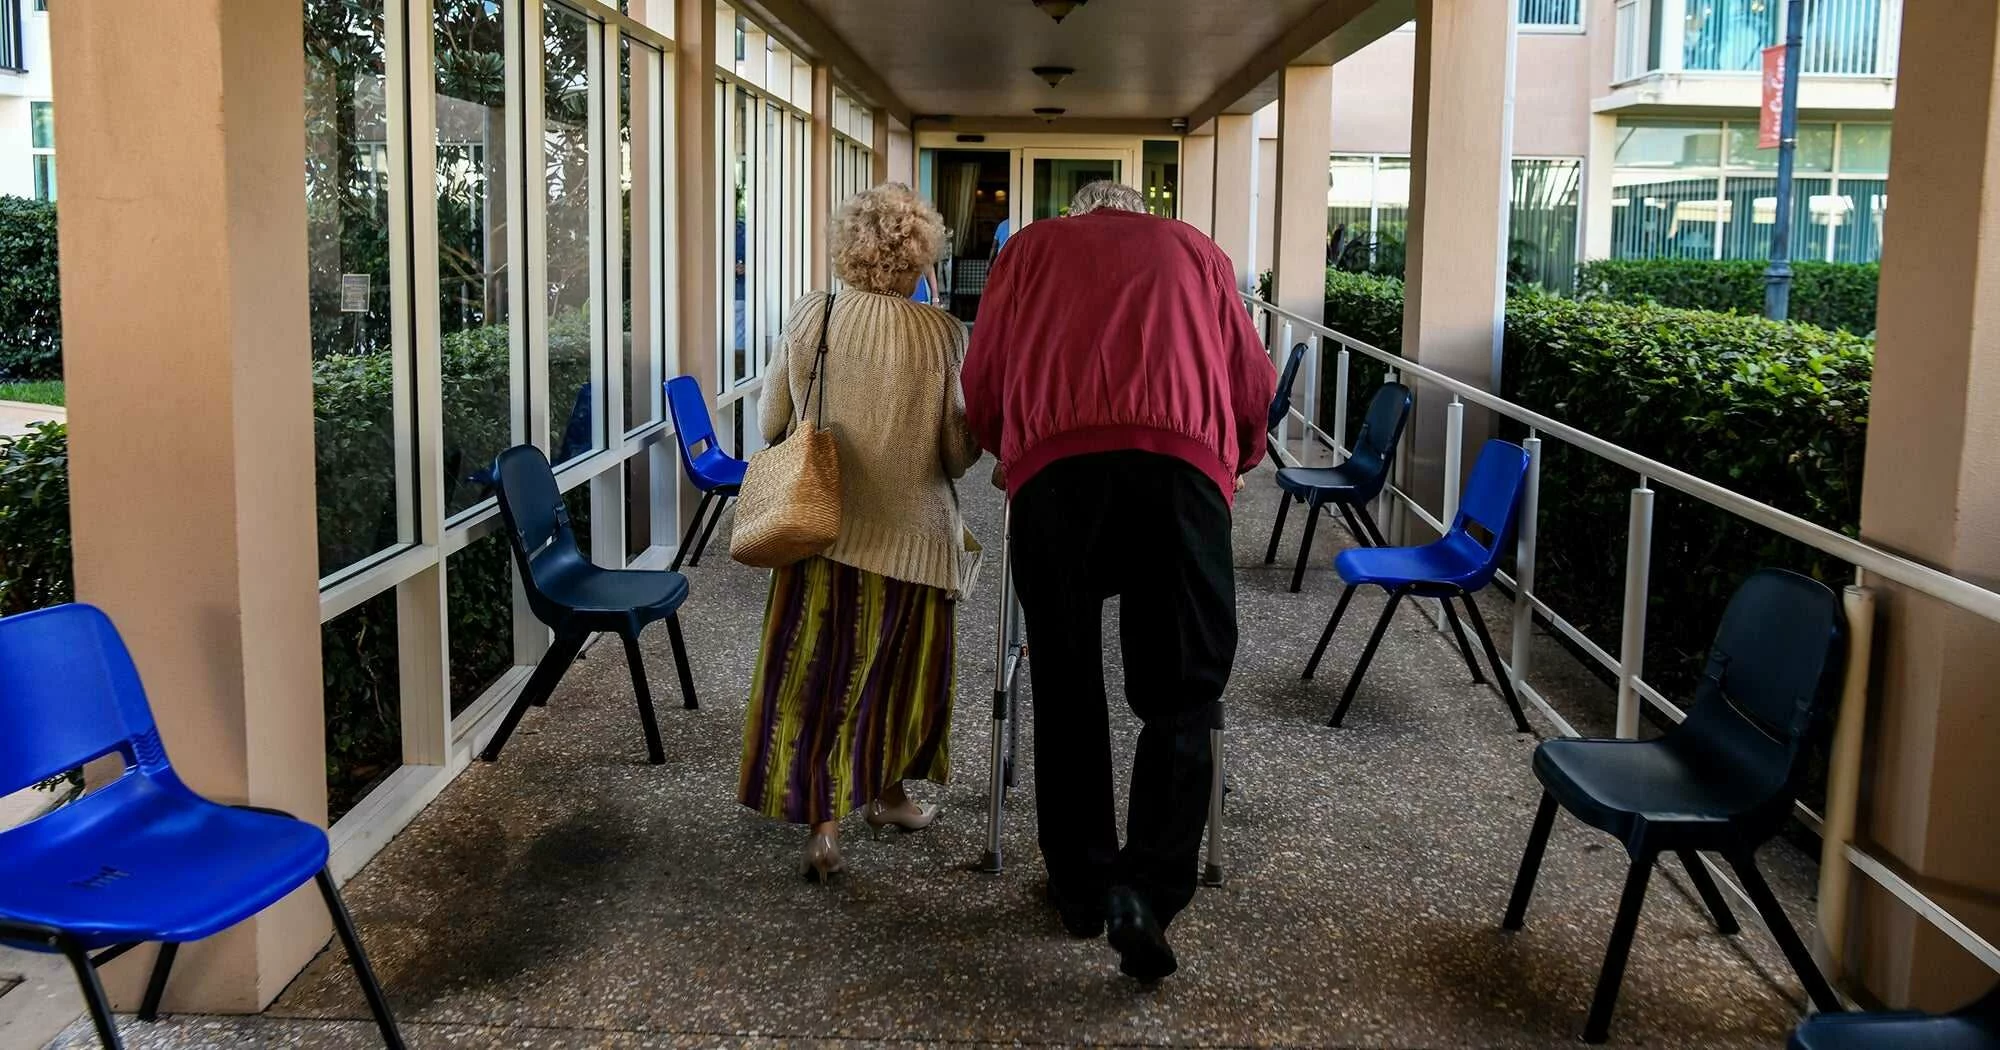 Why Are So Many People Ready To Let The Elderly Die?